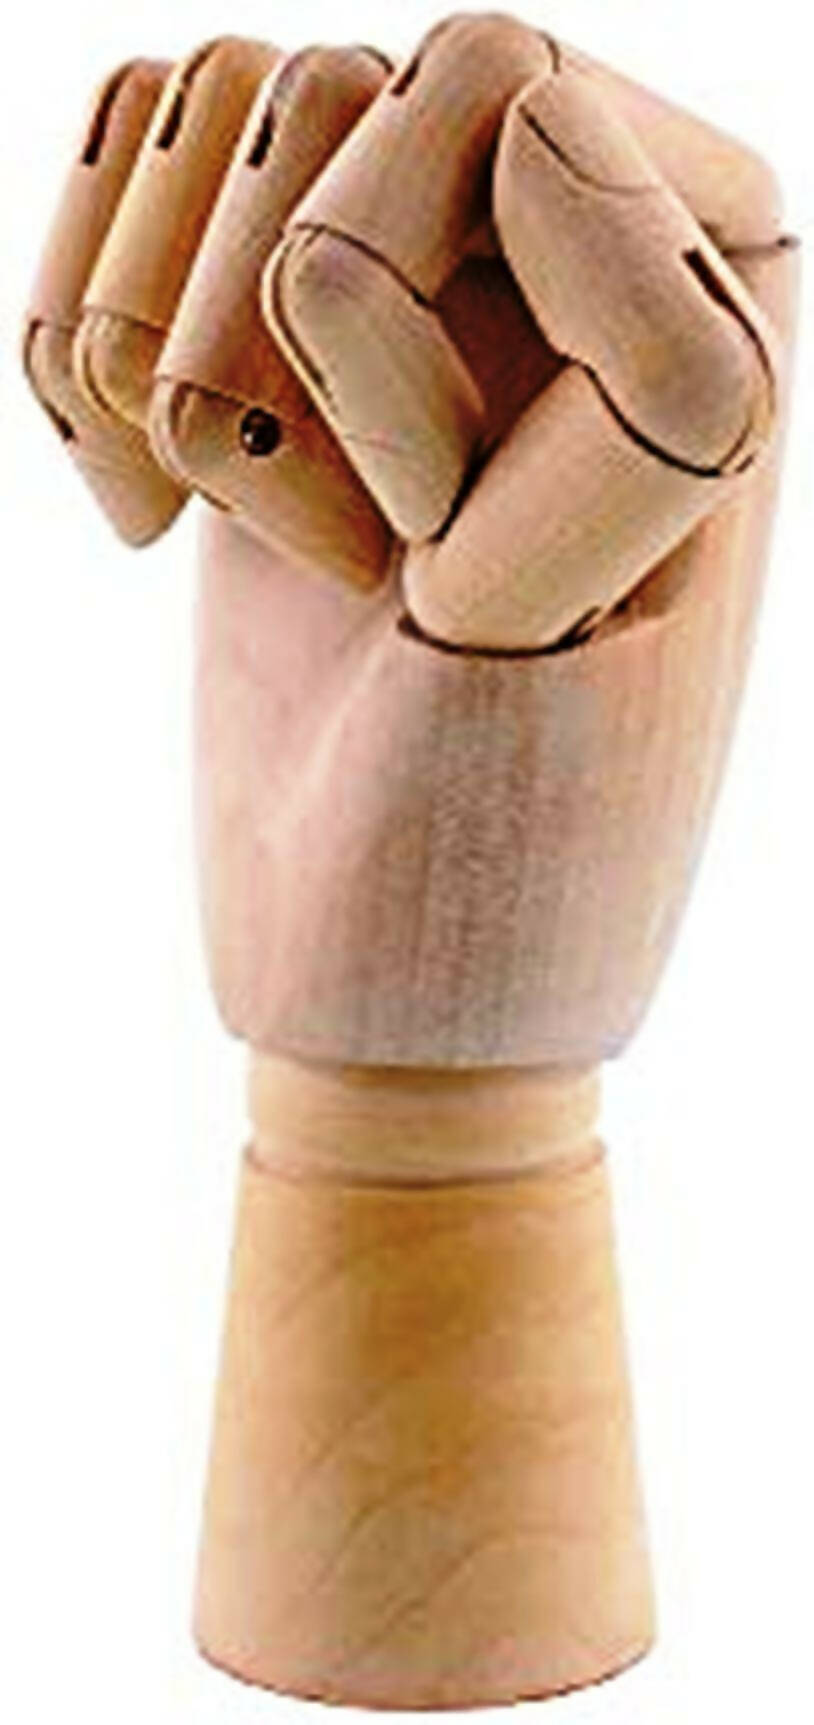 Wooden Female Hand Model for Sketching / Drawing For Artists